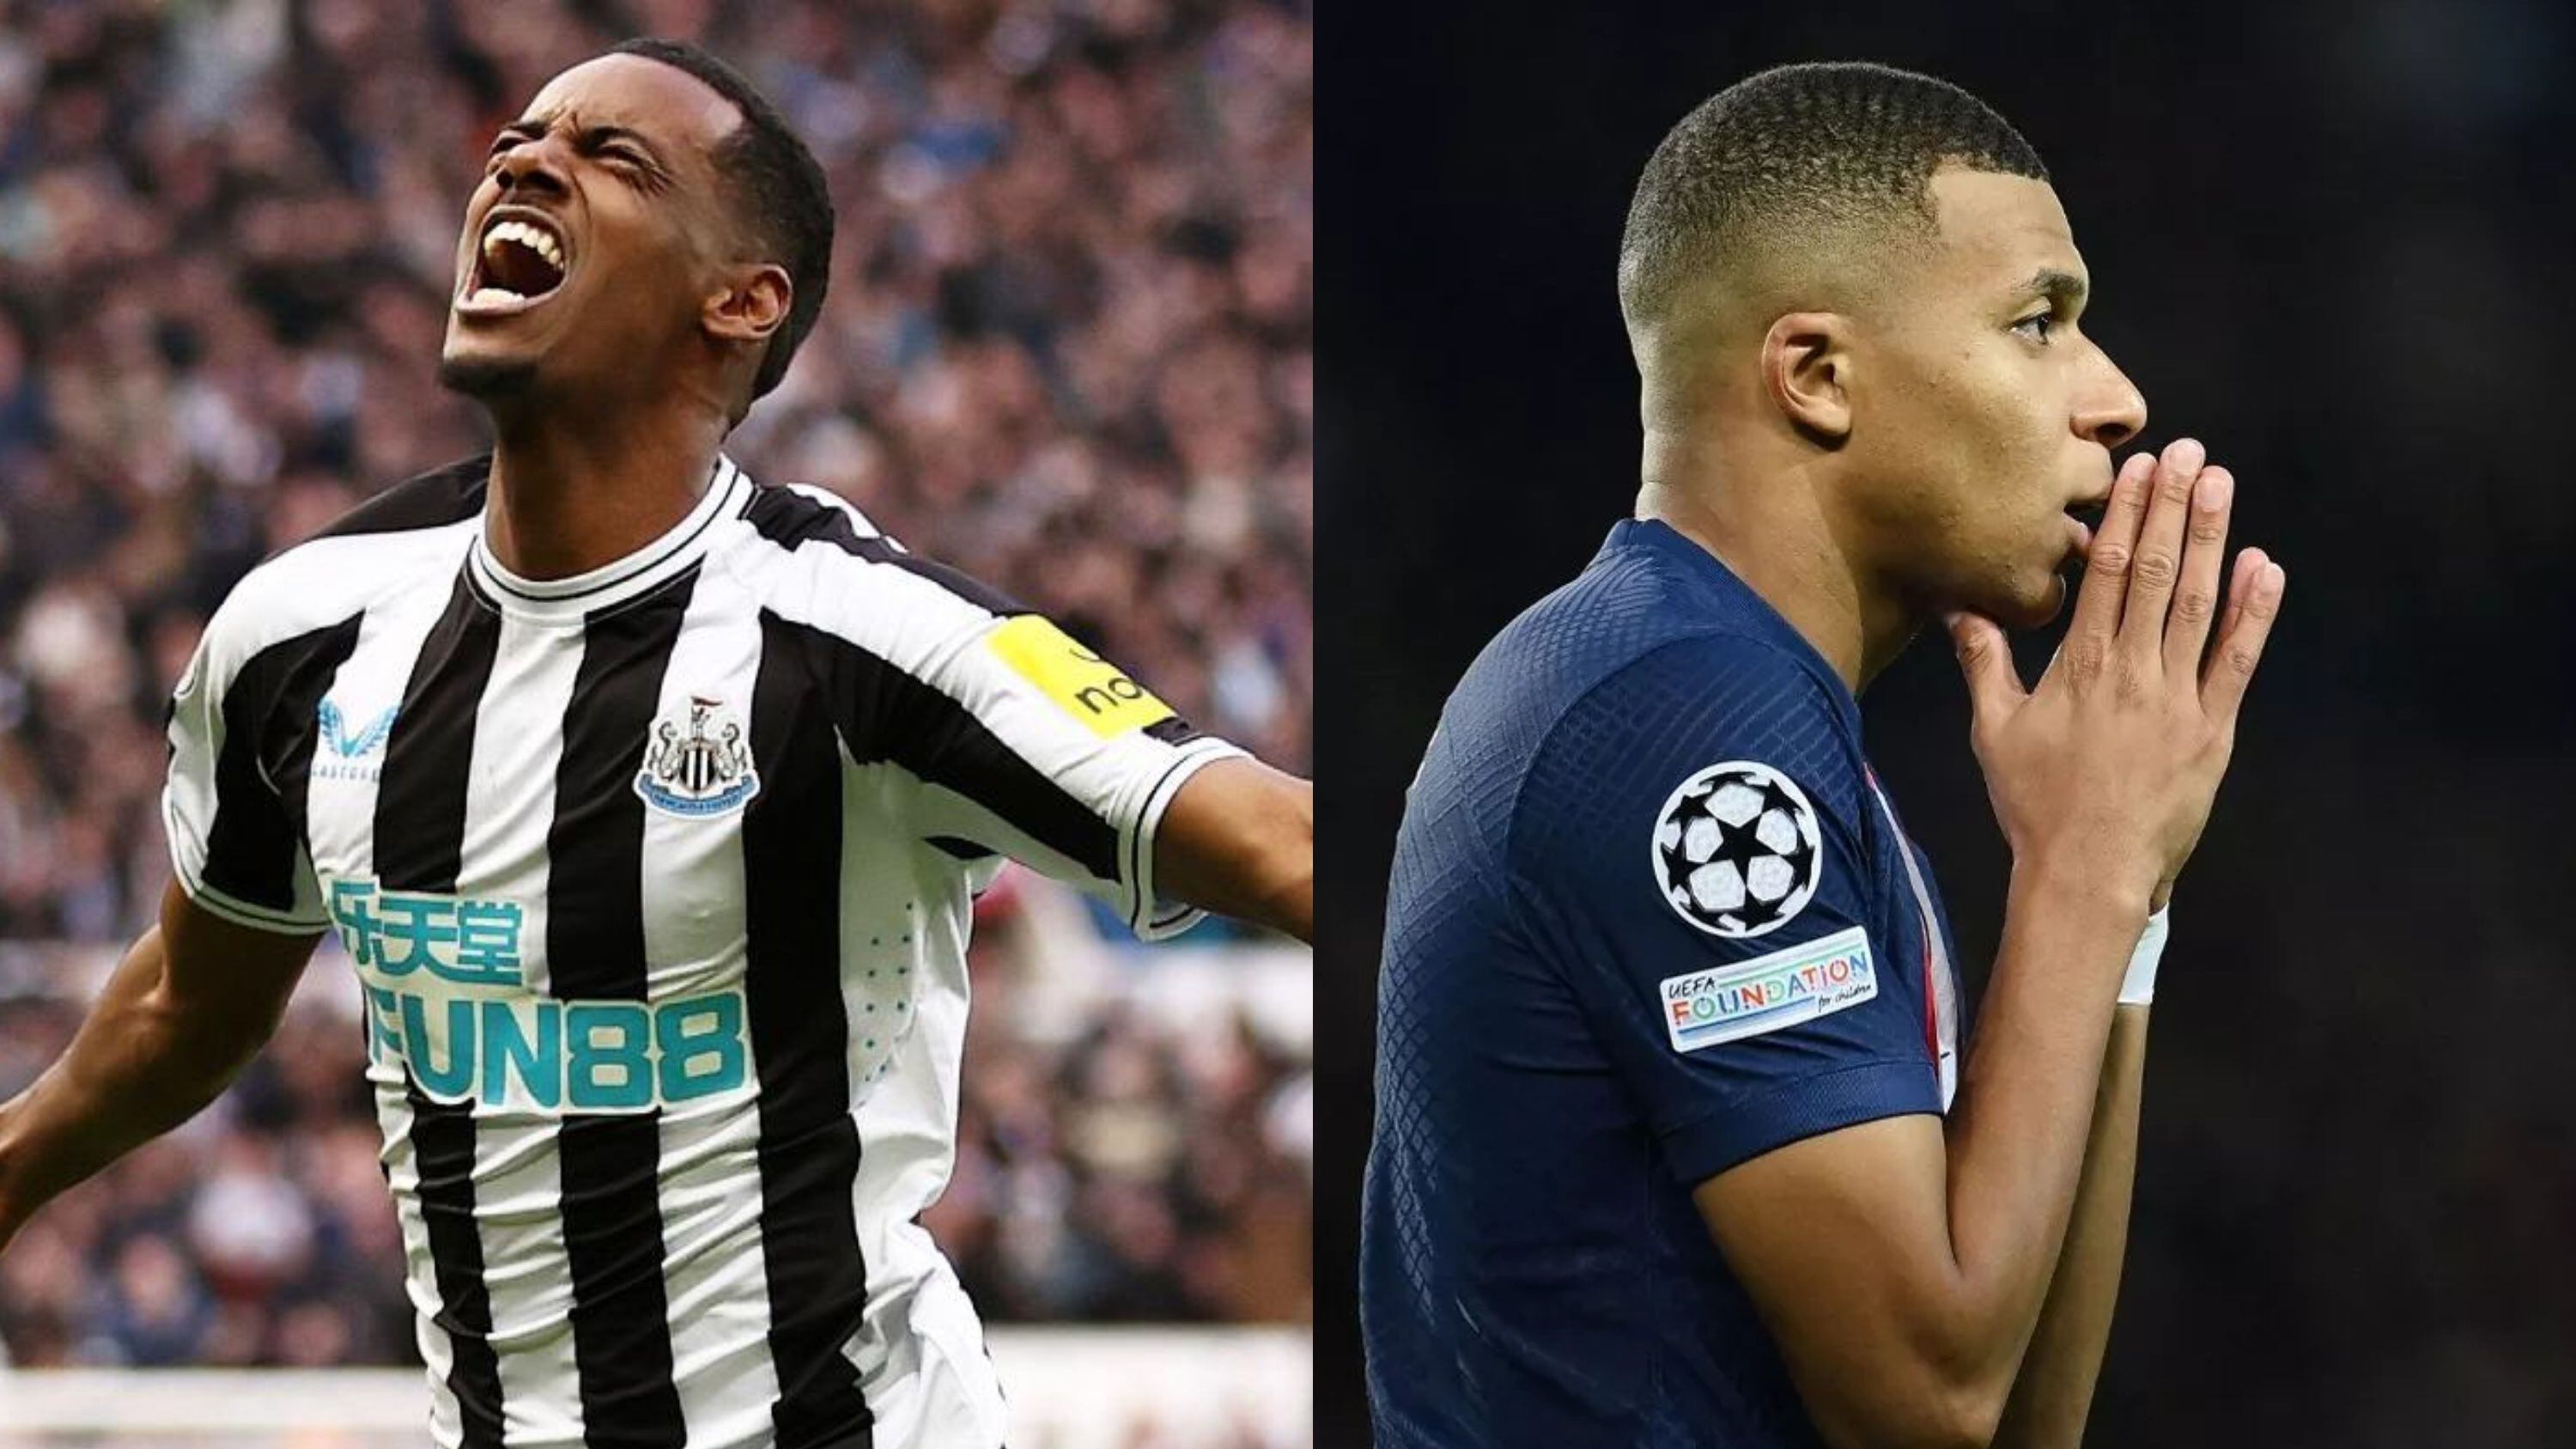 (VIDEO) Mbappe's reaction to the goal in PSG vs Newcastle that could leave them eliminated